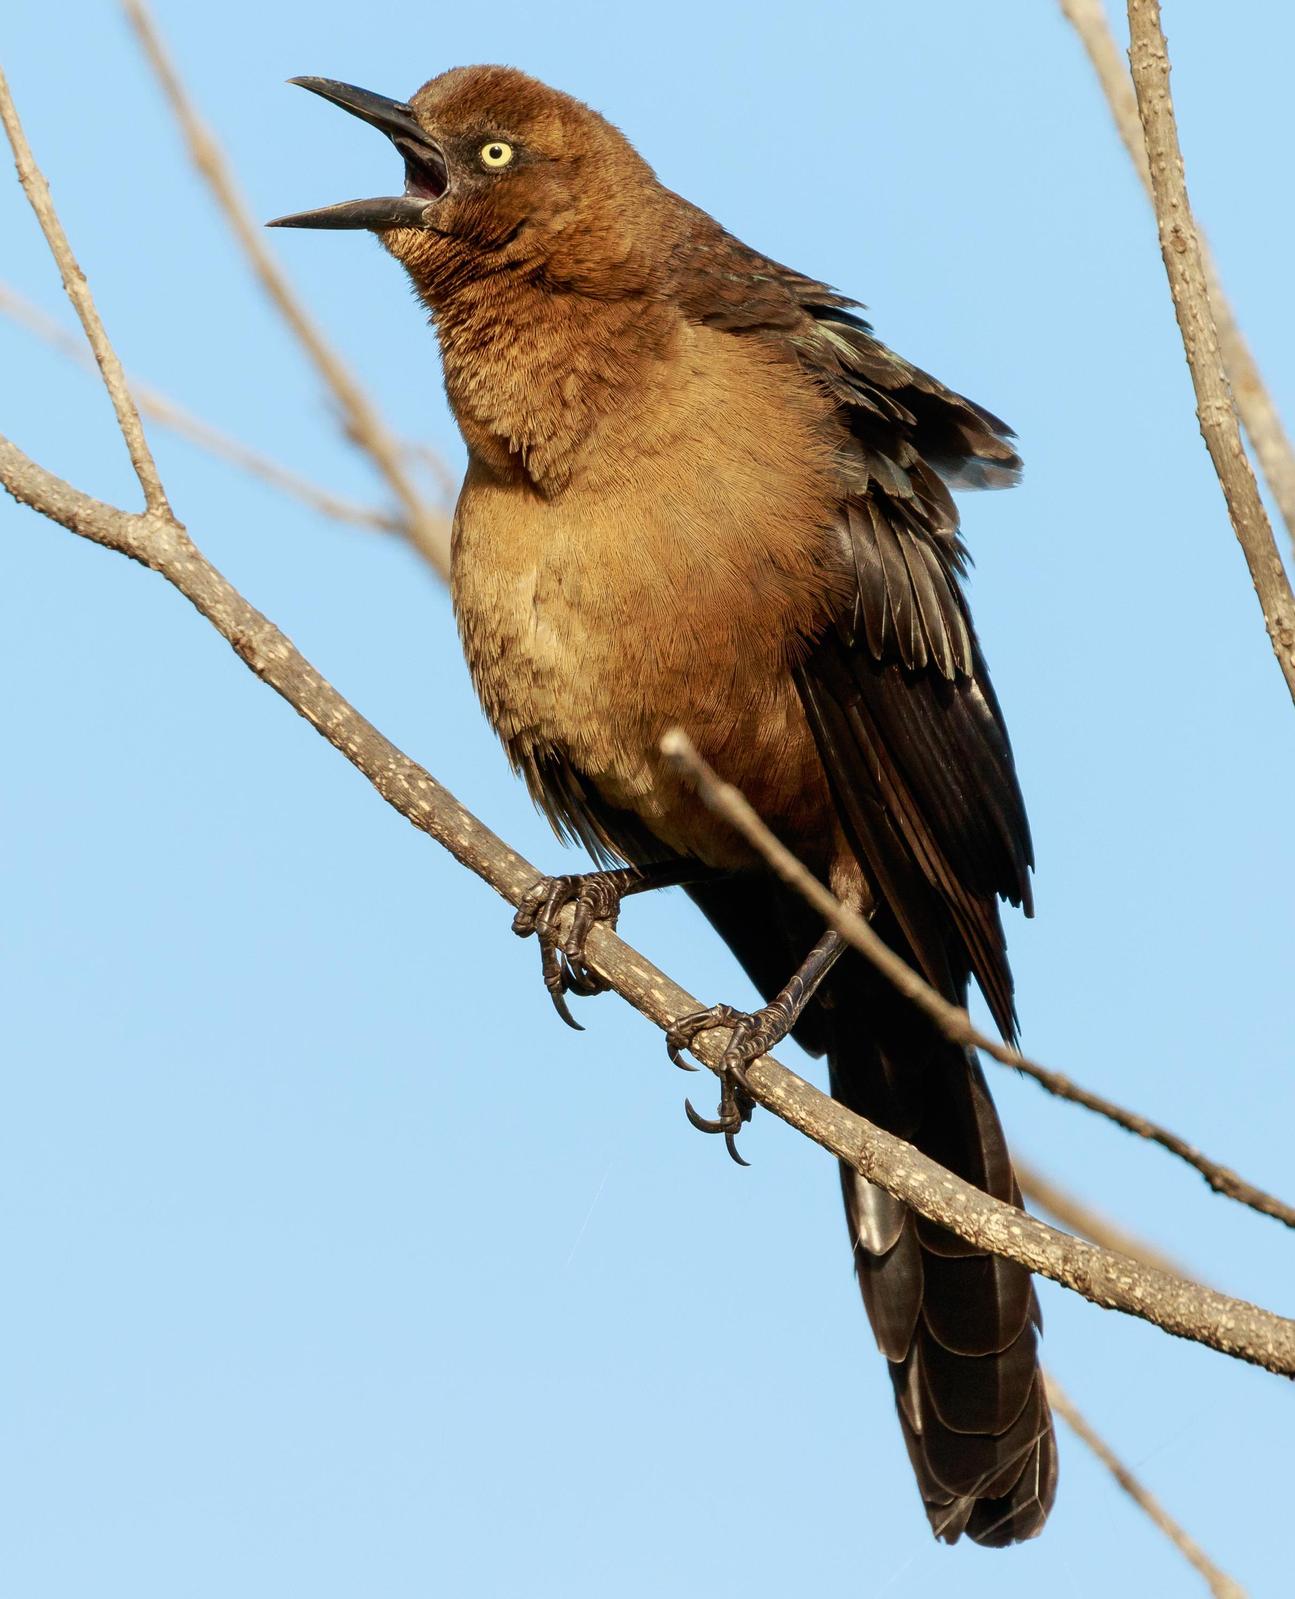 Great-tailed Grackle Photo by John Hannan